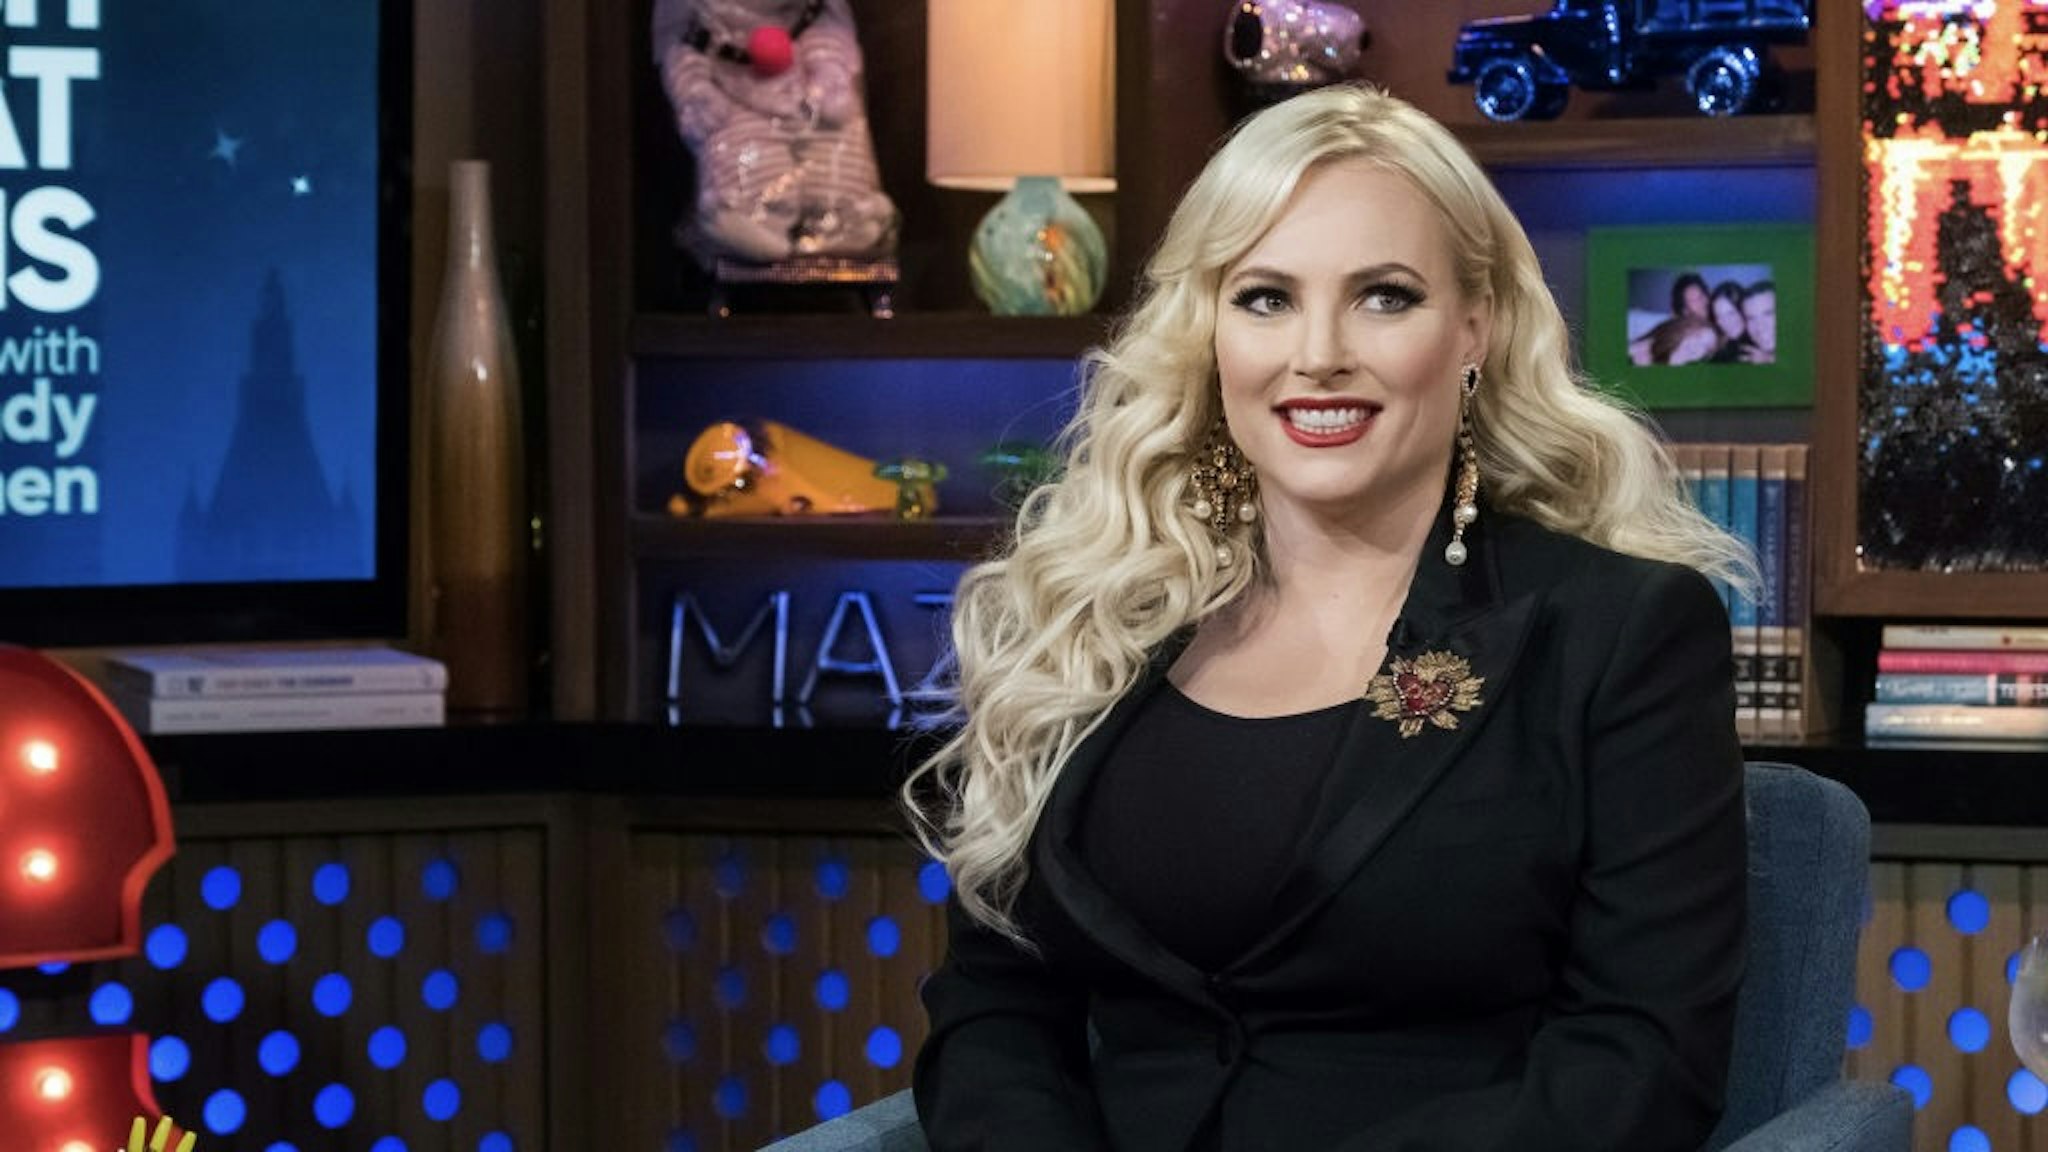 Watch What Happens Live With Andy Cohen - Season 15 WATCH WHAT HAPPENS LIVE WITH ANDY COHEN -- Pictured: Meghan McCain -- (Photo by: Charles Sykes/Bravo/NBCU Photo Bank/NBCUniversal via Getty Images) Bravo / Contributor via Getty Images